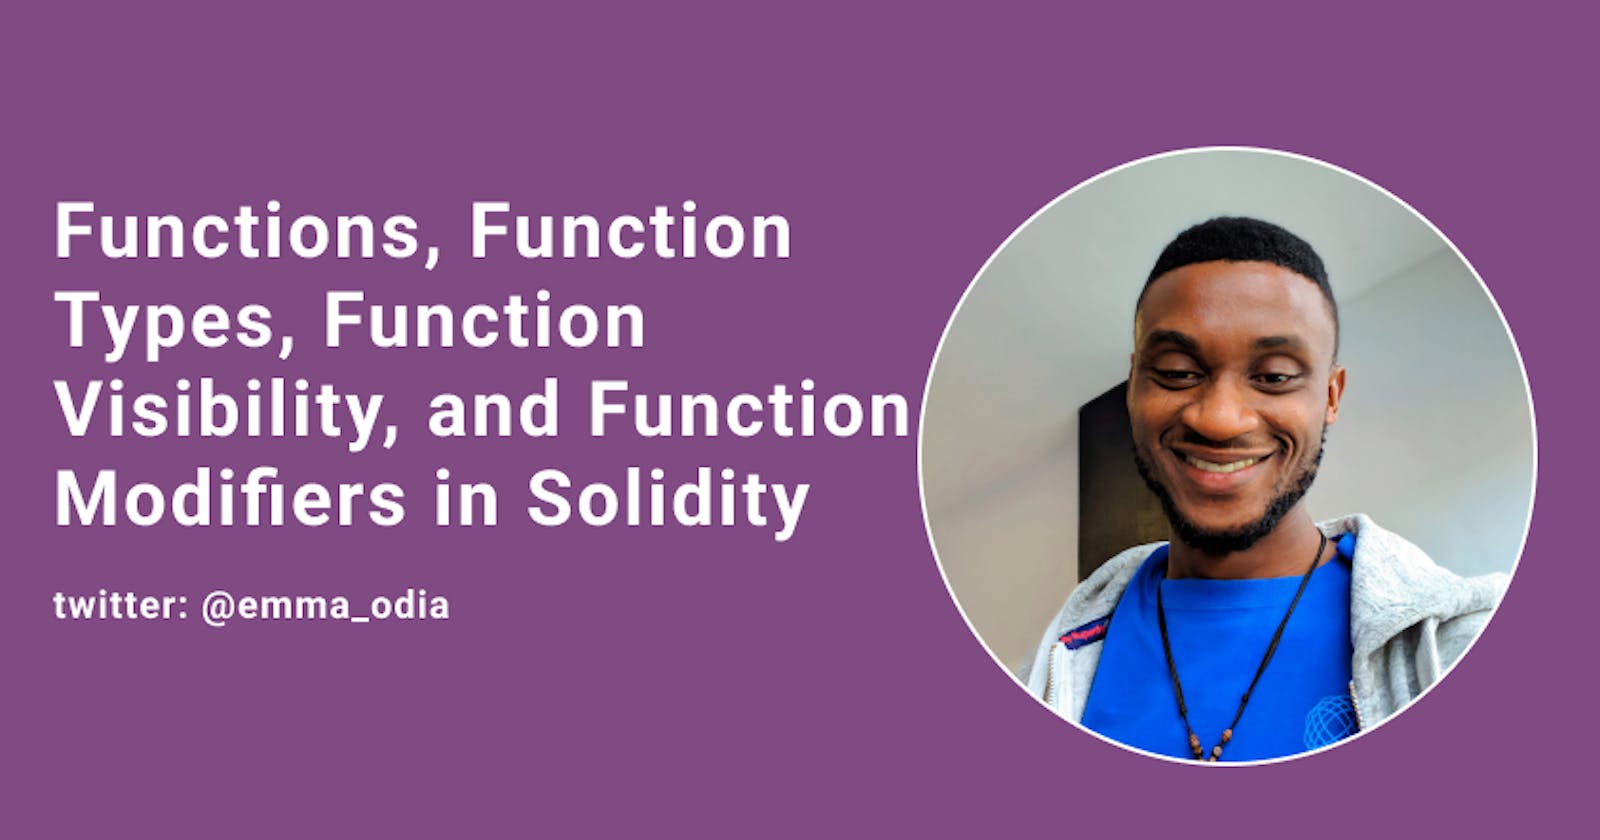 Functions, Function Types, Function Visibility, and Function Modifiers in Solidity